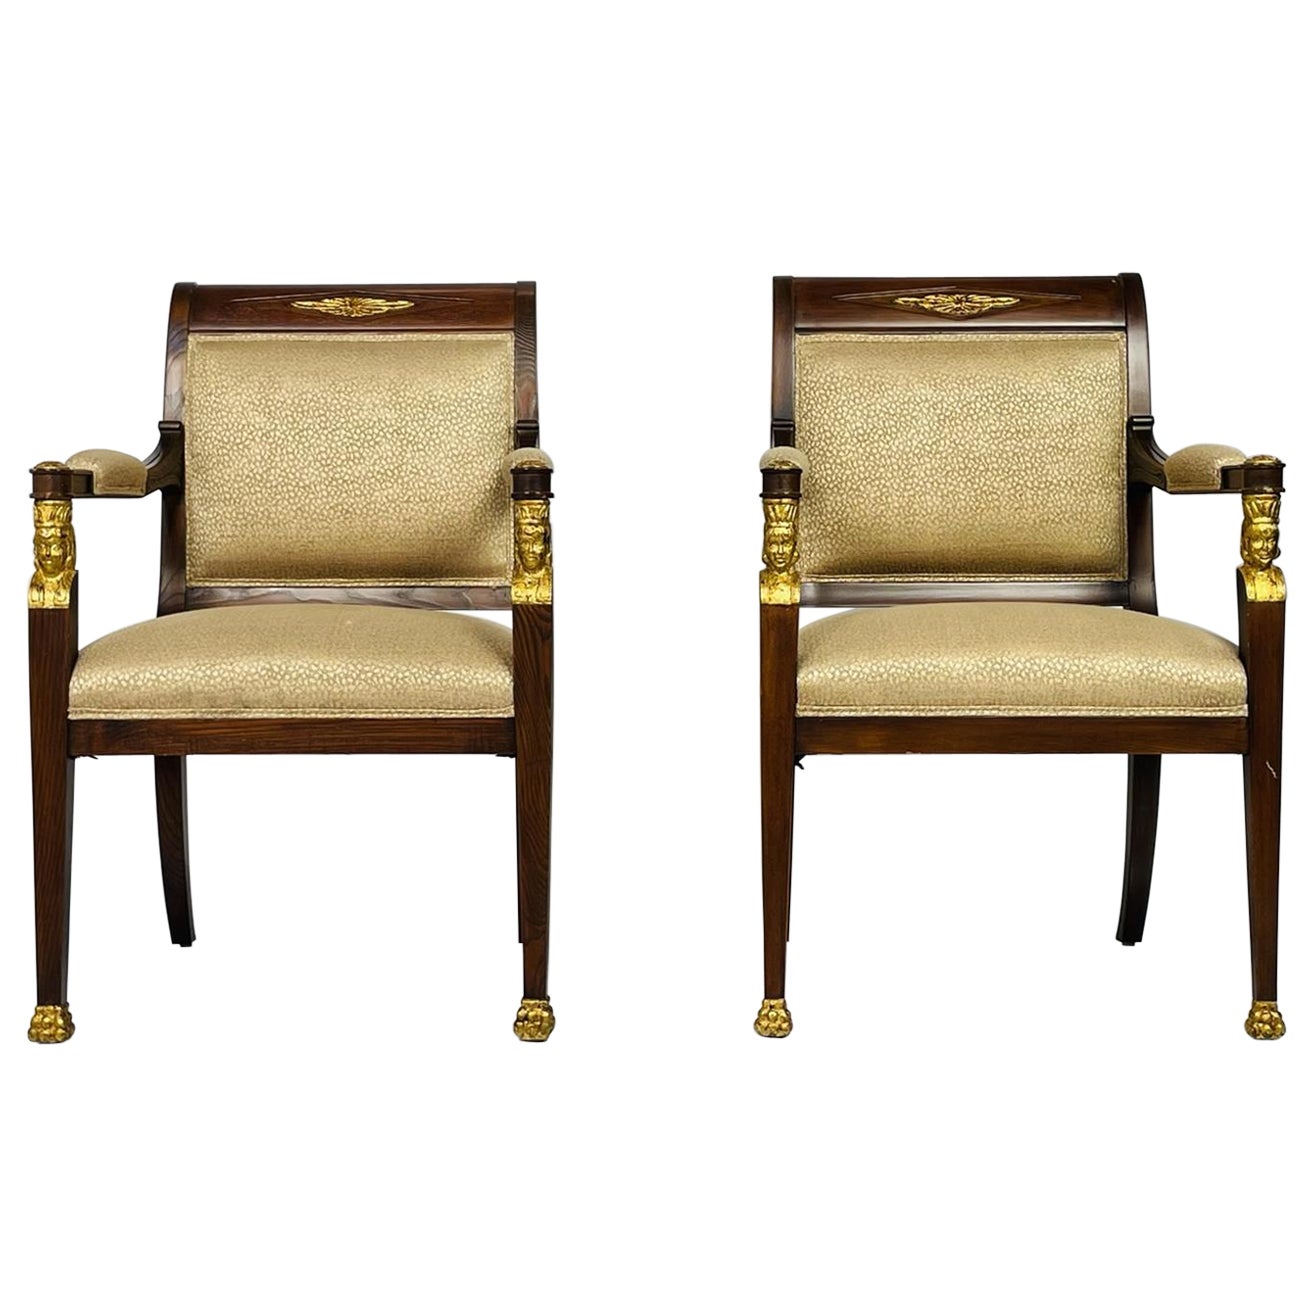 French Empire style Mahogany Armchairs Giltwood For Sale